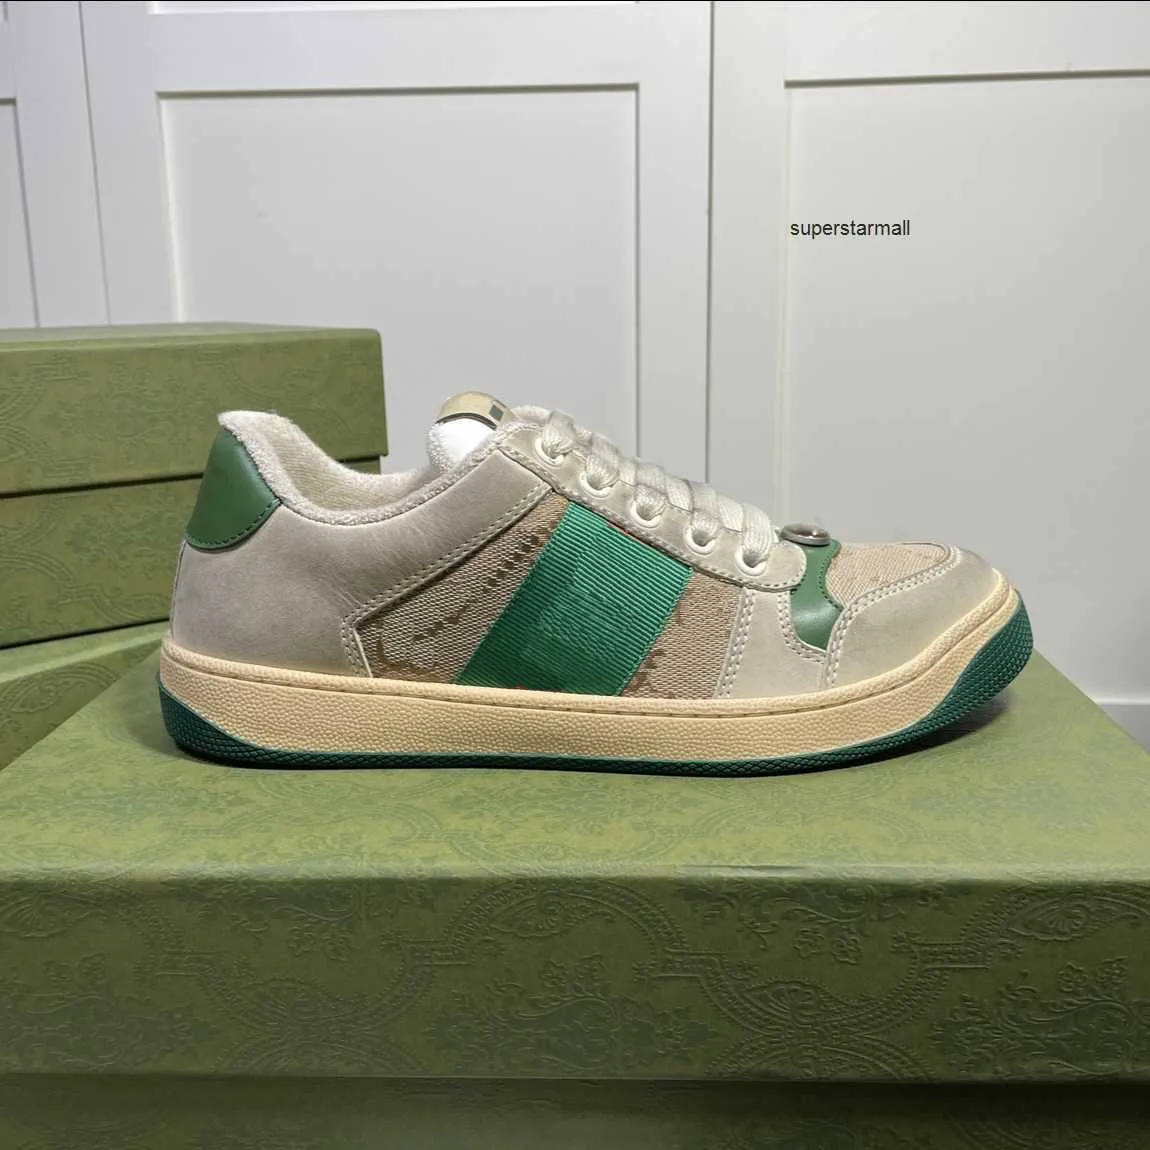 Screener Sneakers Casual Chaussures Designer Dirty Beige Butter Femmes Hommes Running Sneaker Vintage Leather Fashion Classic Red Green Stripe Pointure 35-46